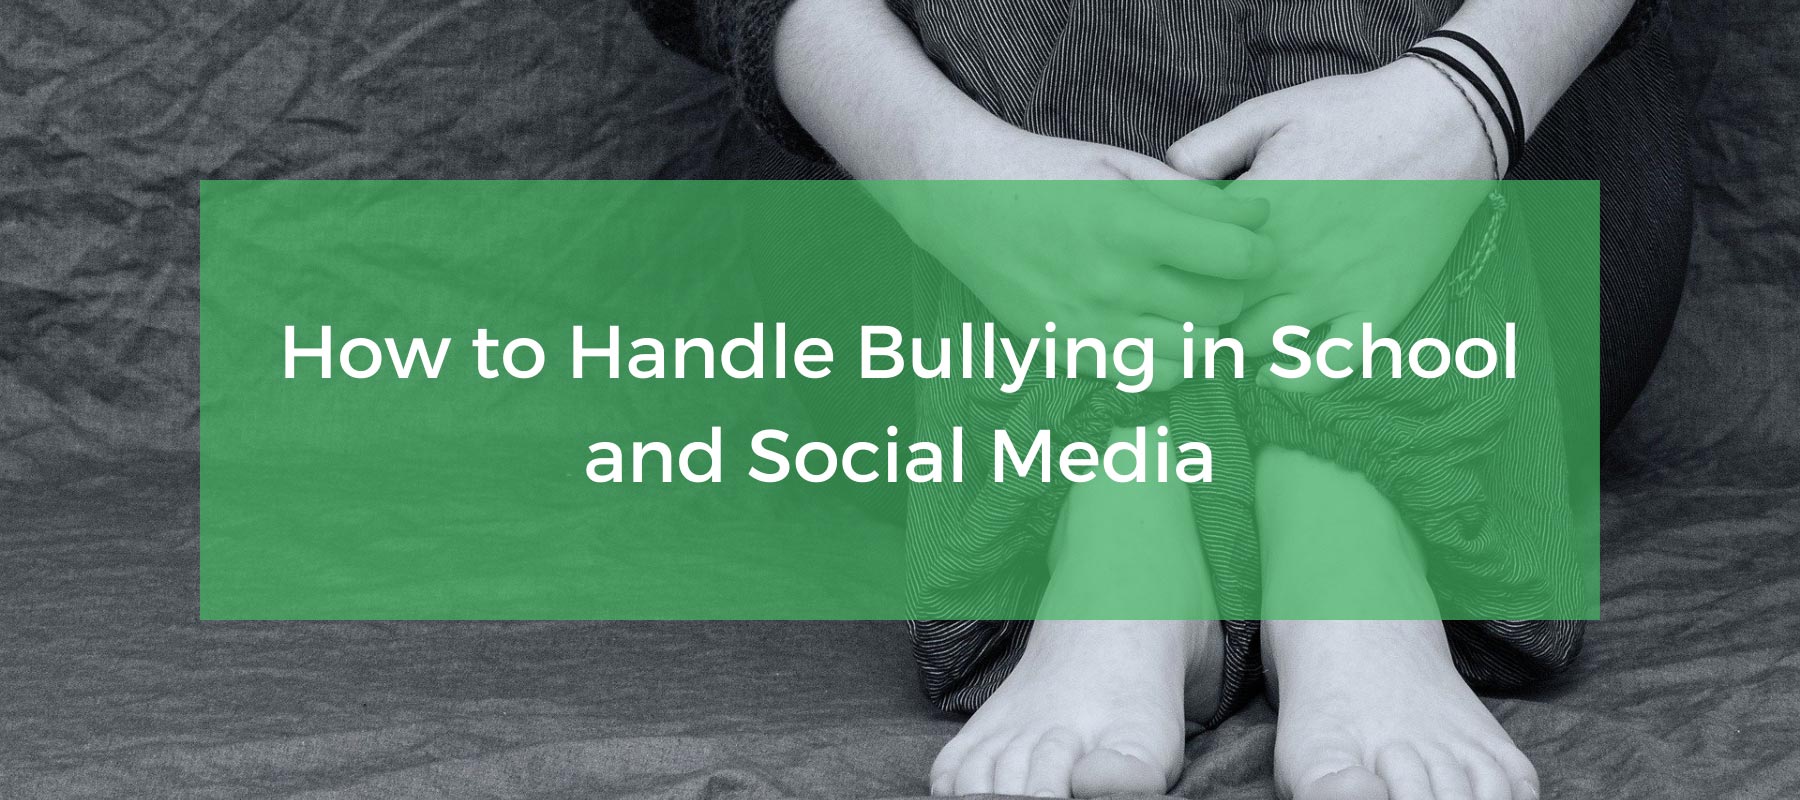 How to Handle Bullying in School and Social Media